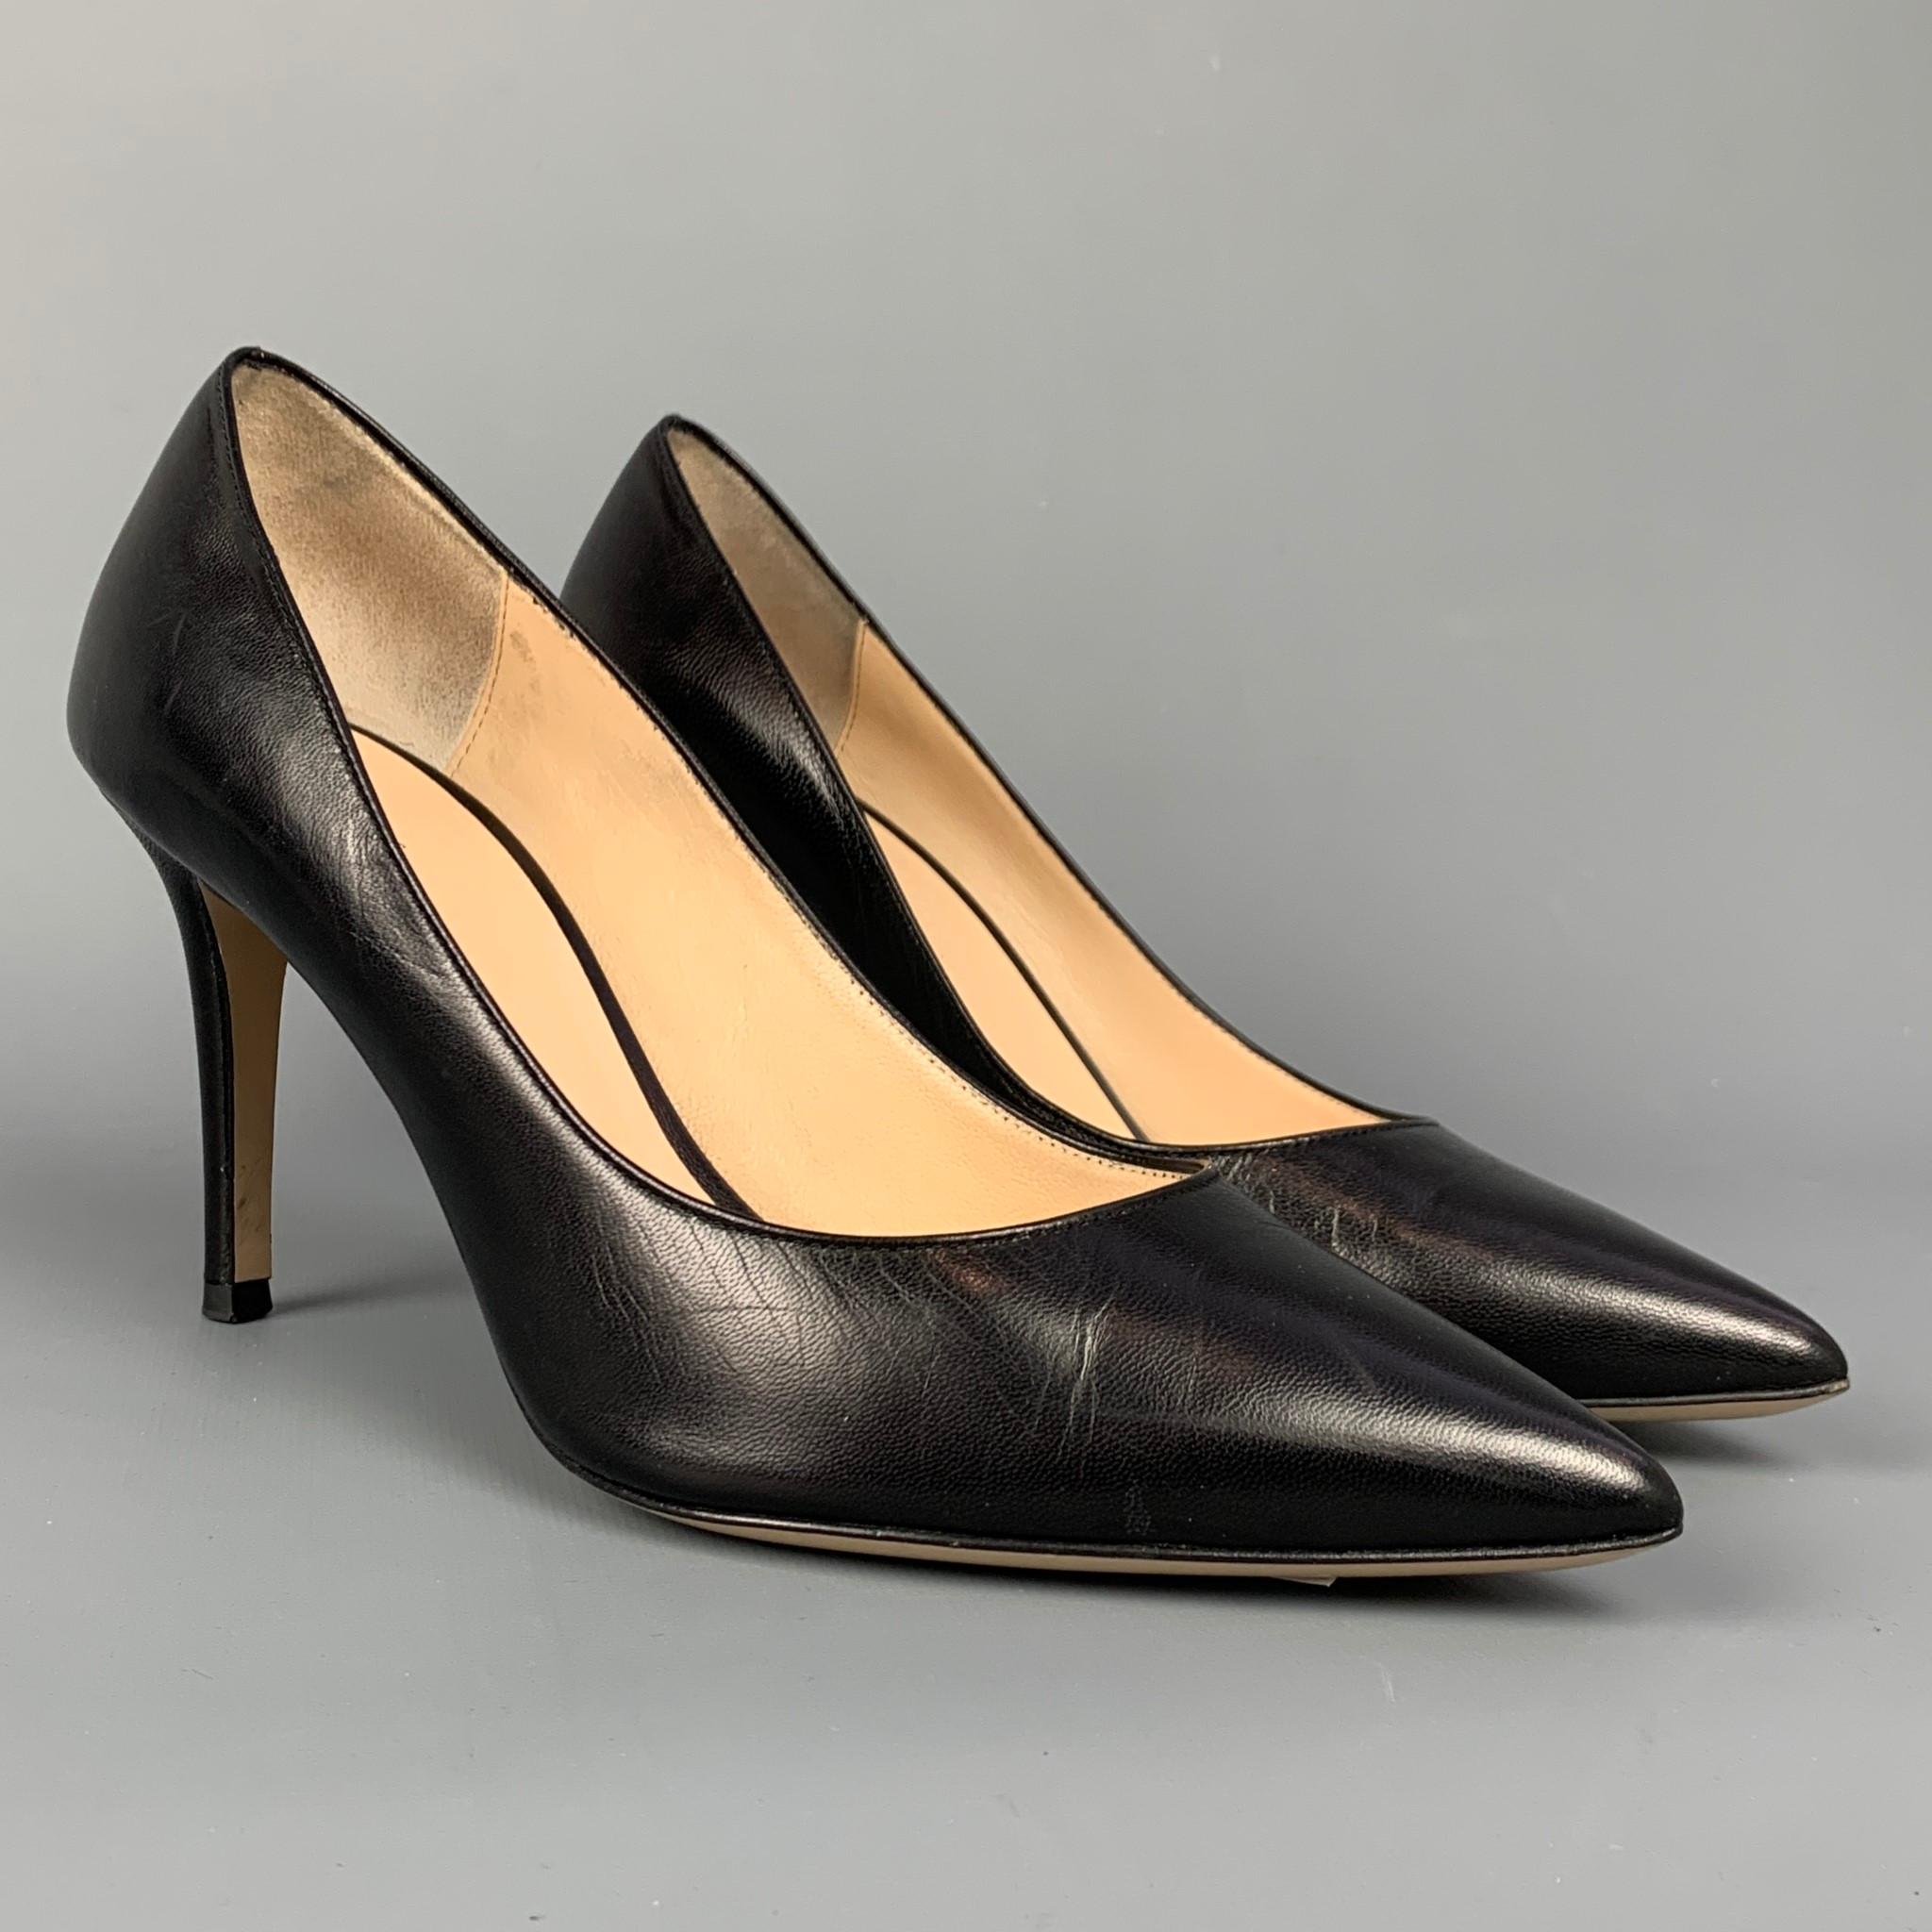 BARNEY'S NEW YORK pumps comes in a black leather featuring a classic style and a pointed toe. Minor wear. Made in Italy.

Very Good Pre-Owned Condition.
Marked: EU 38.5

Measurements:

Heel: 3.5 in.